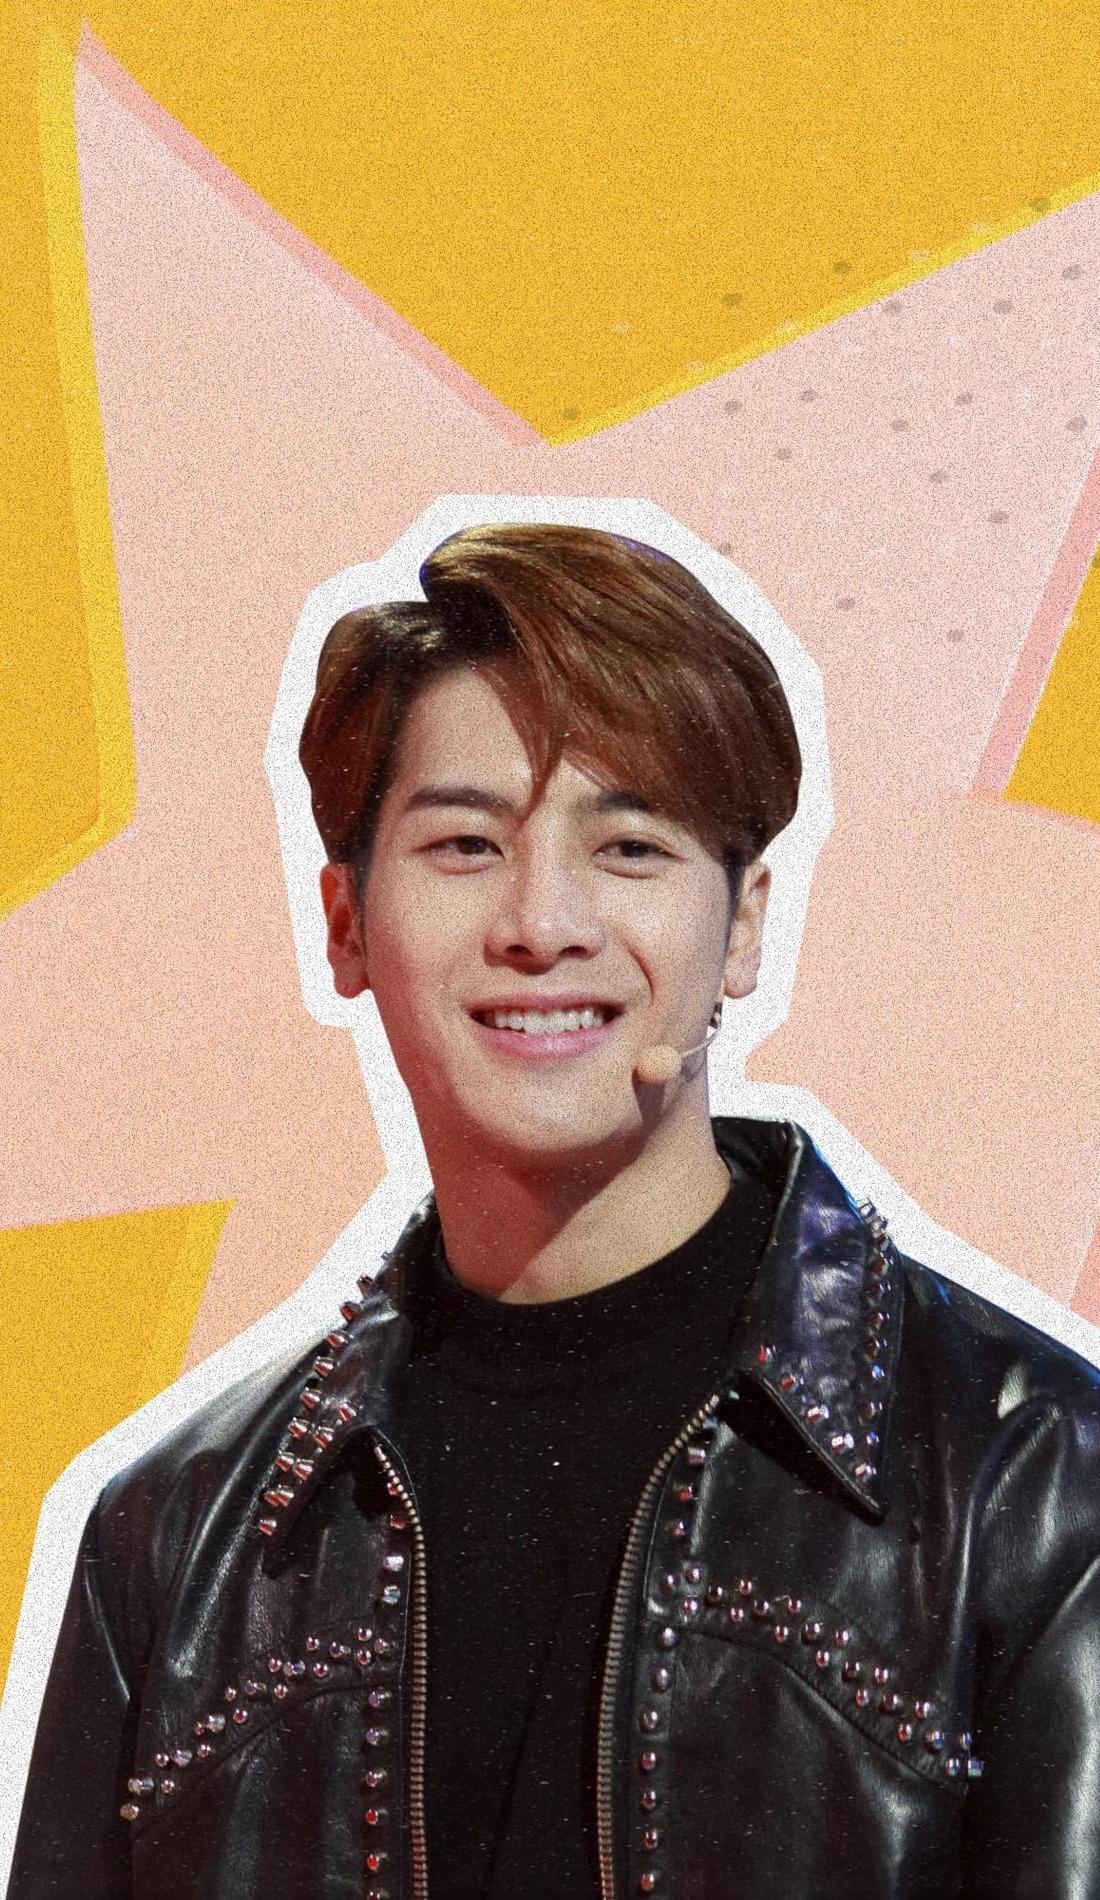 Jackson Wang 'Magic Man' Tour North America 2023: Tickets, presale, where  to buy, venues, dates and more